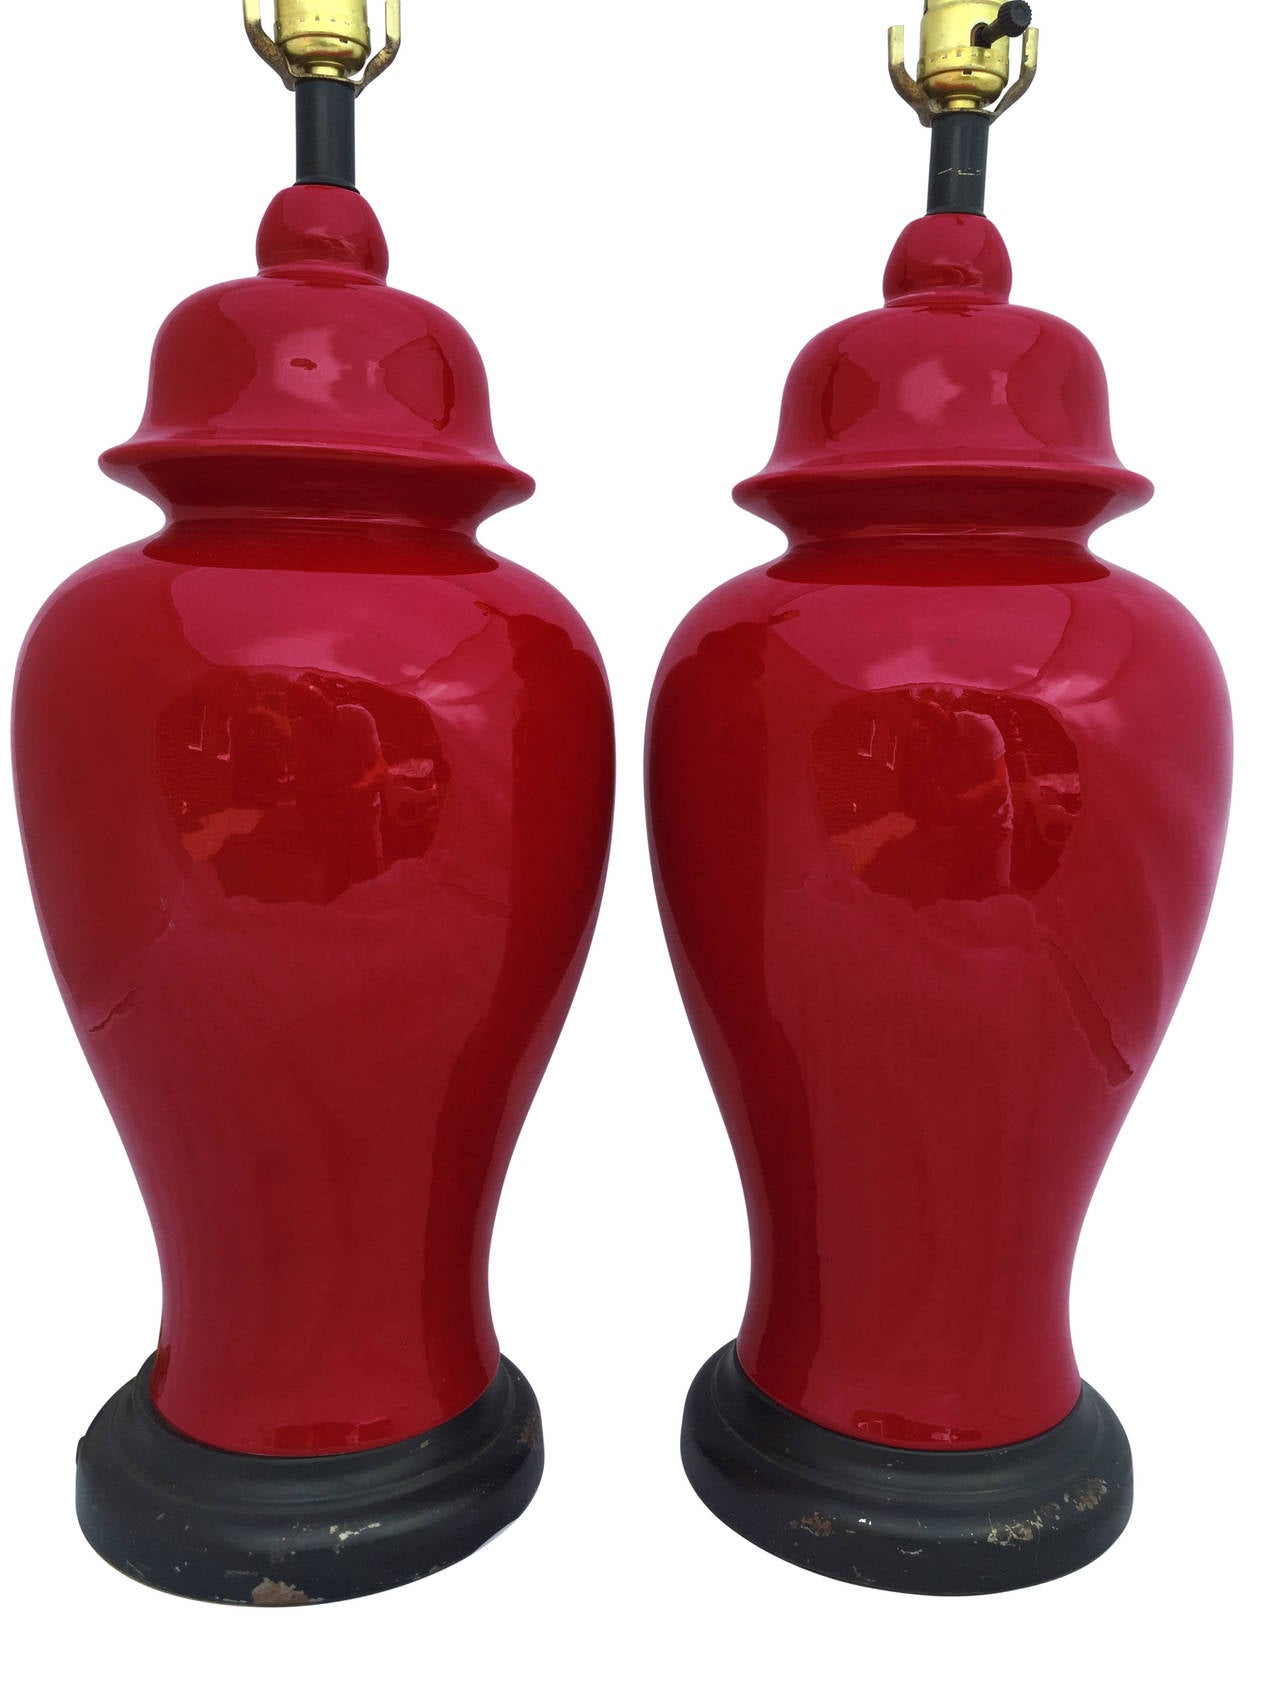 This is a gorgeous pair of Mid-Century ginger jar lamps. The red is a bold, deep blood red. The black painted metal bases have some wear, showing their authentic age. Newly wired with UL listed approved parts.